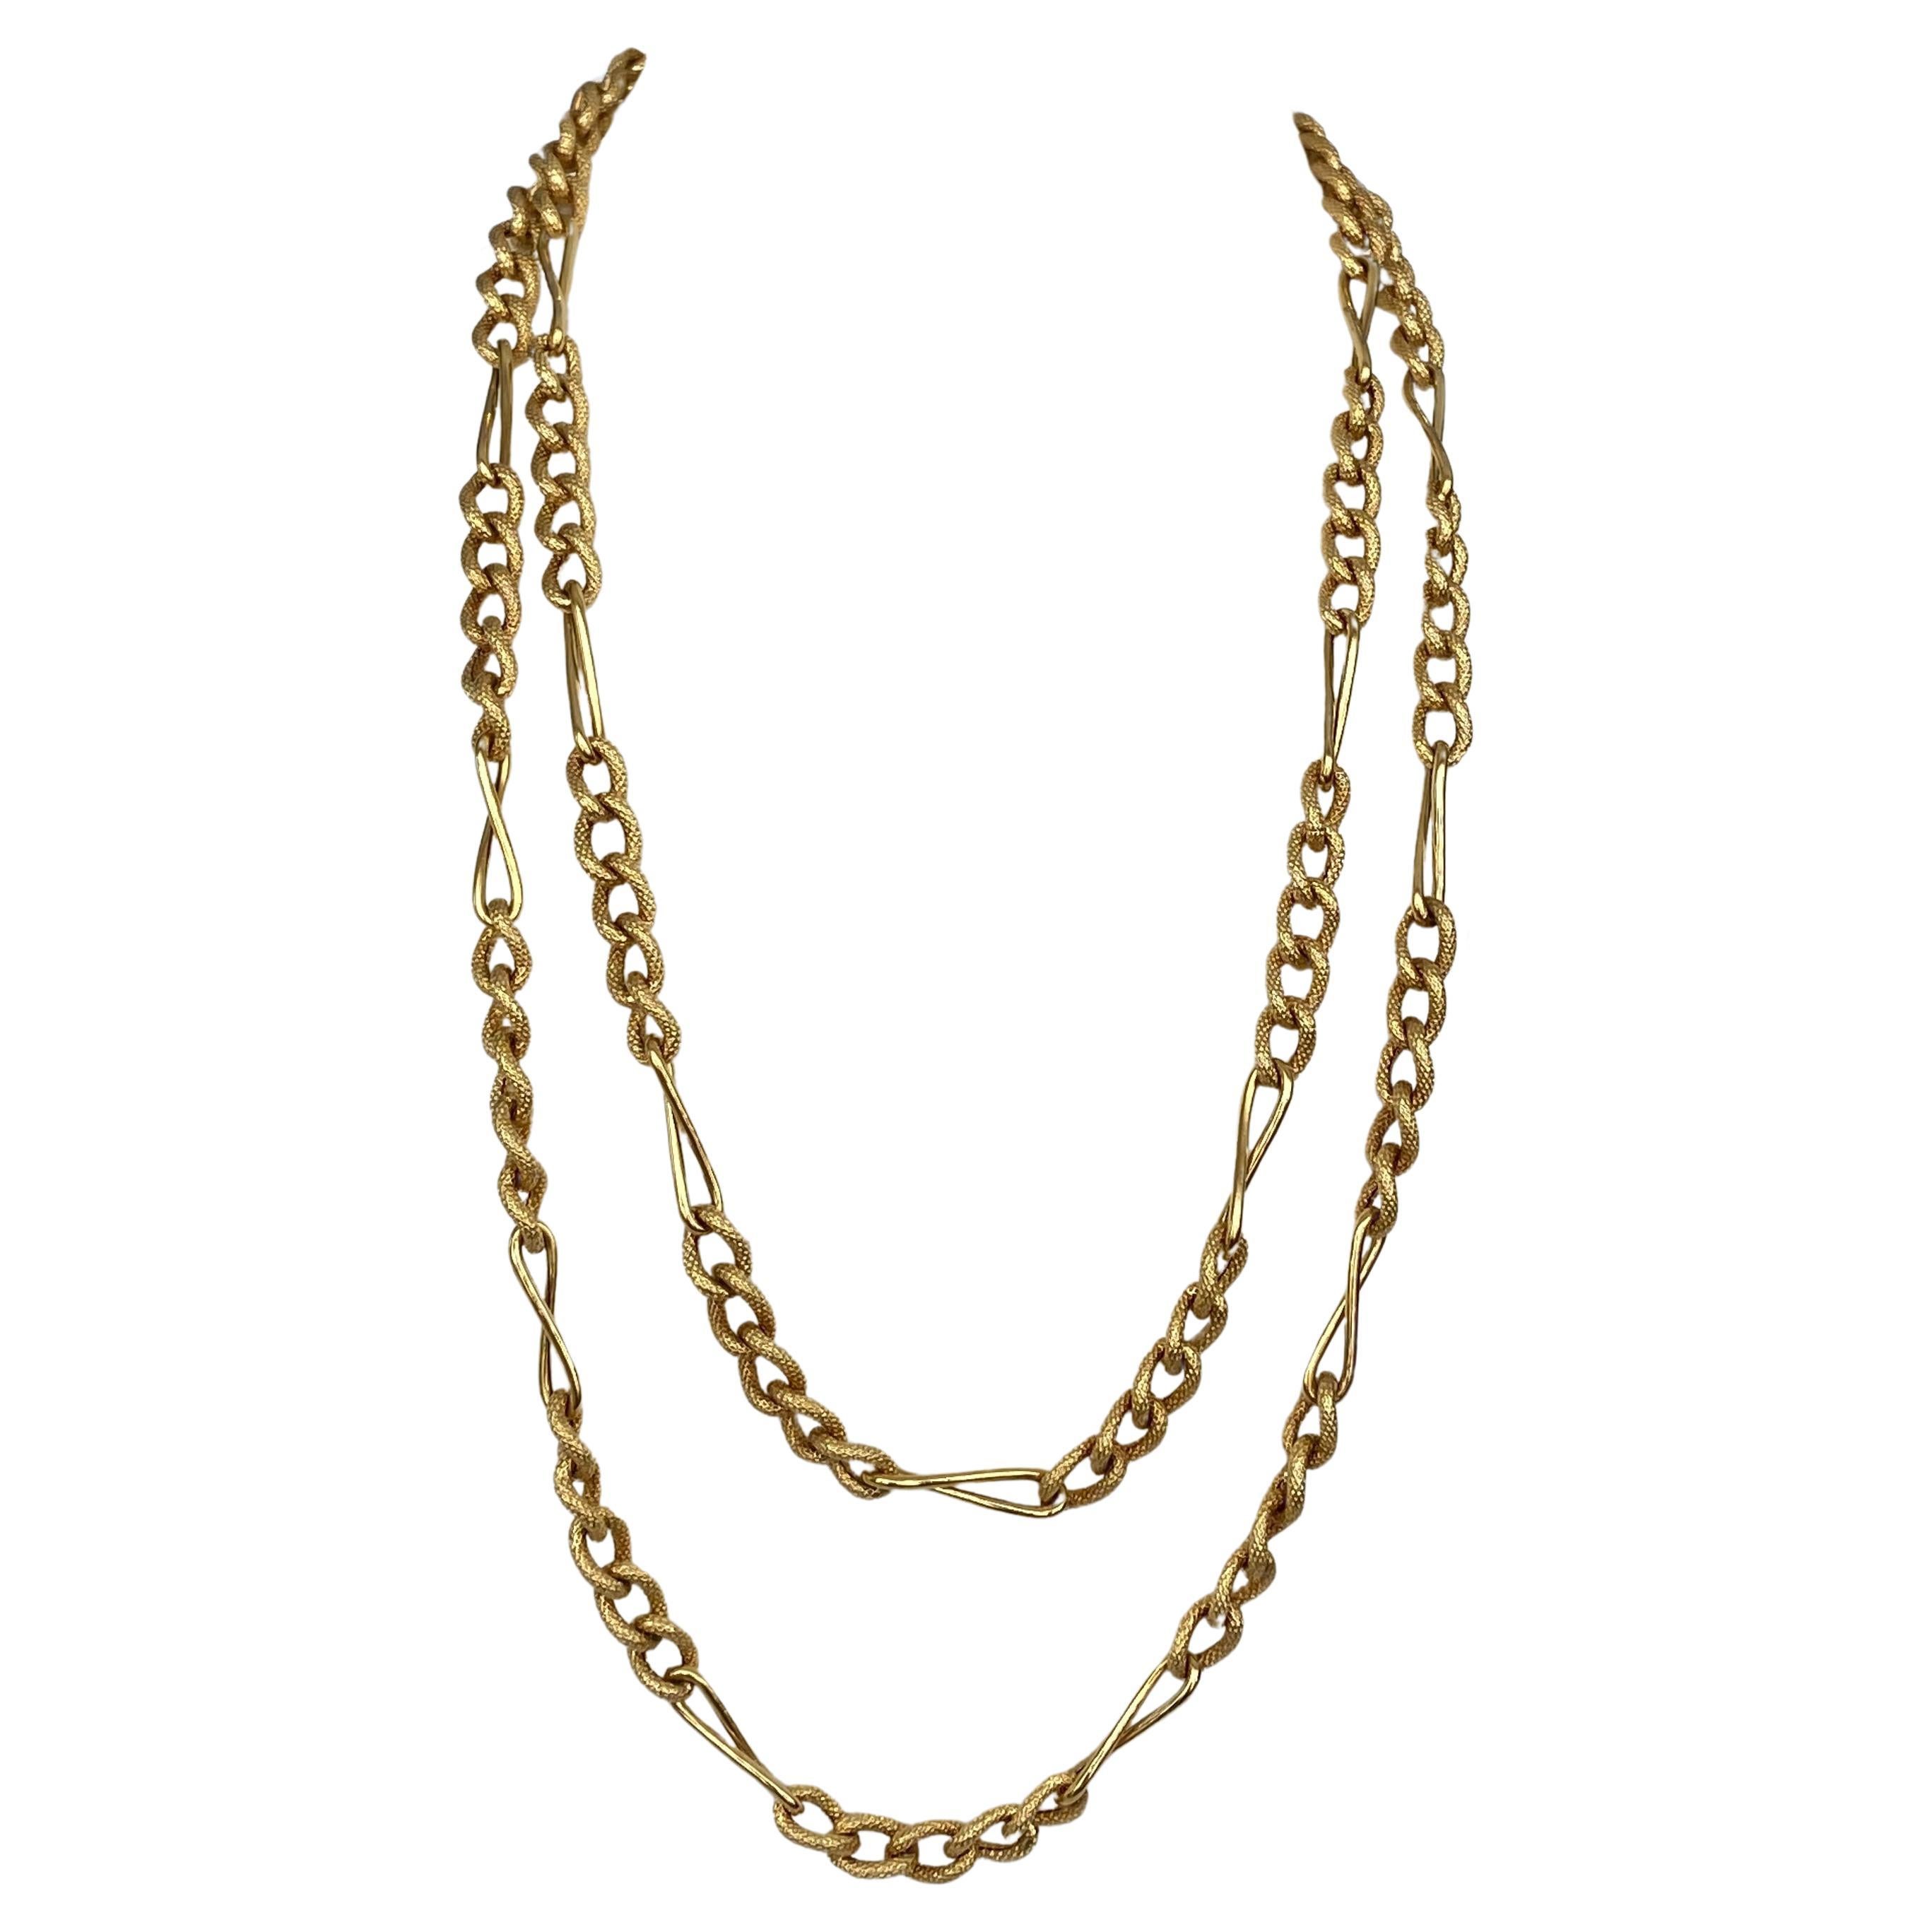 18 KT yellow gold design necklace